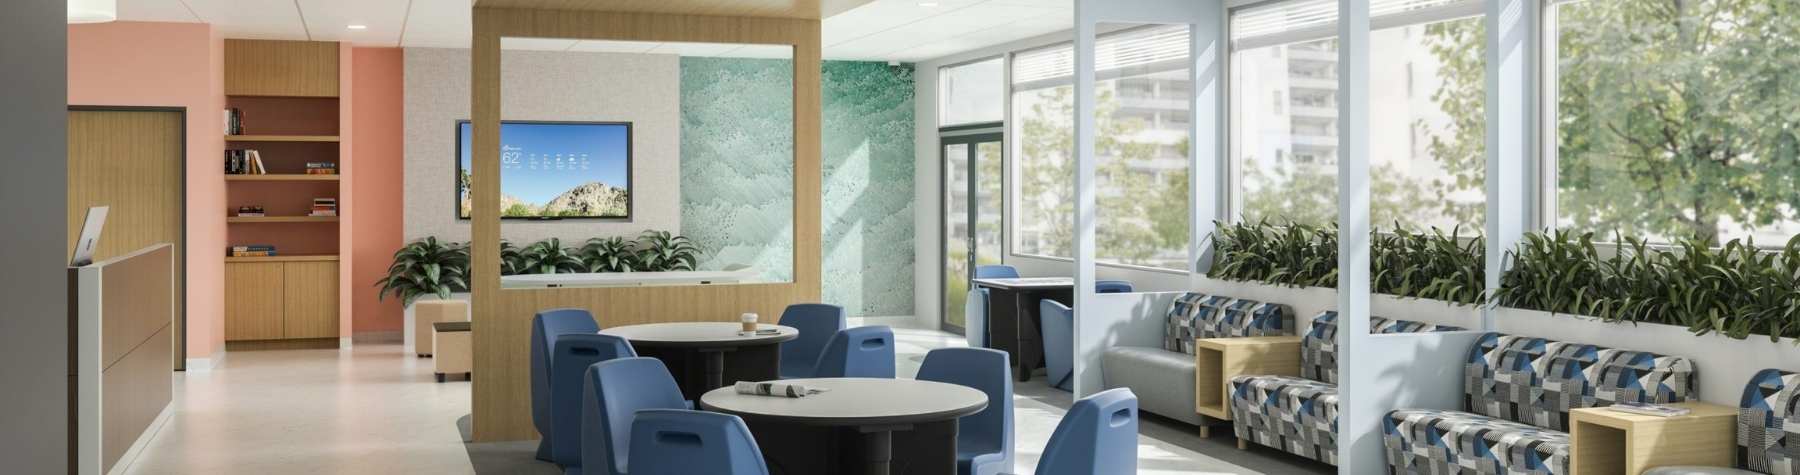 Healthcare environment with range of seating options